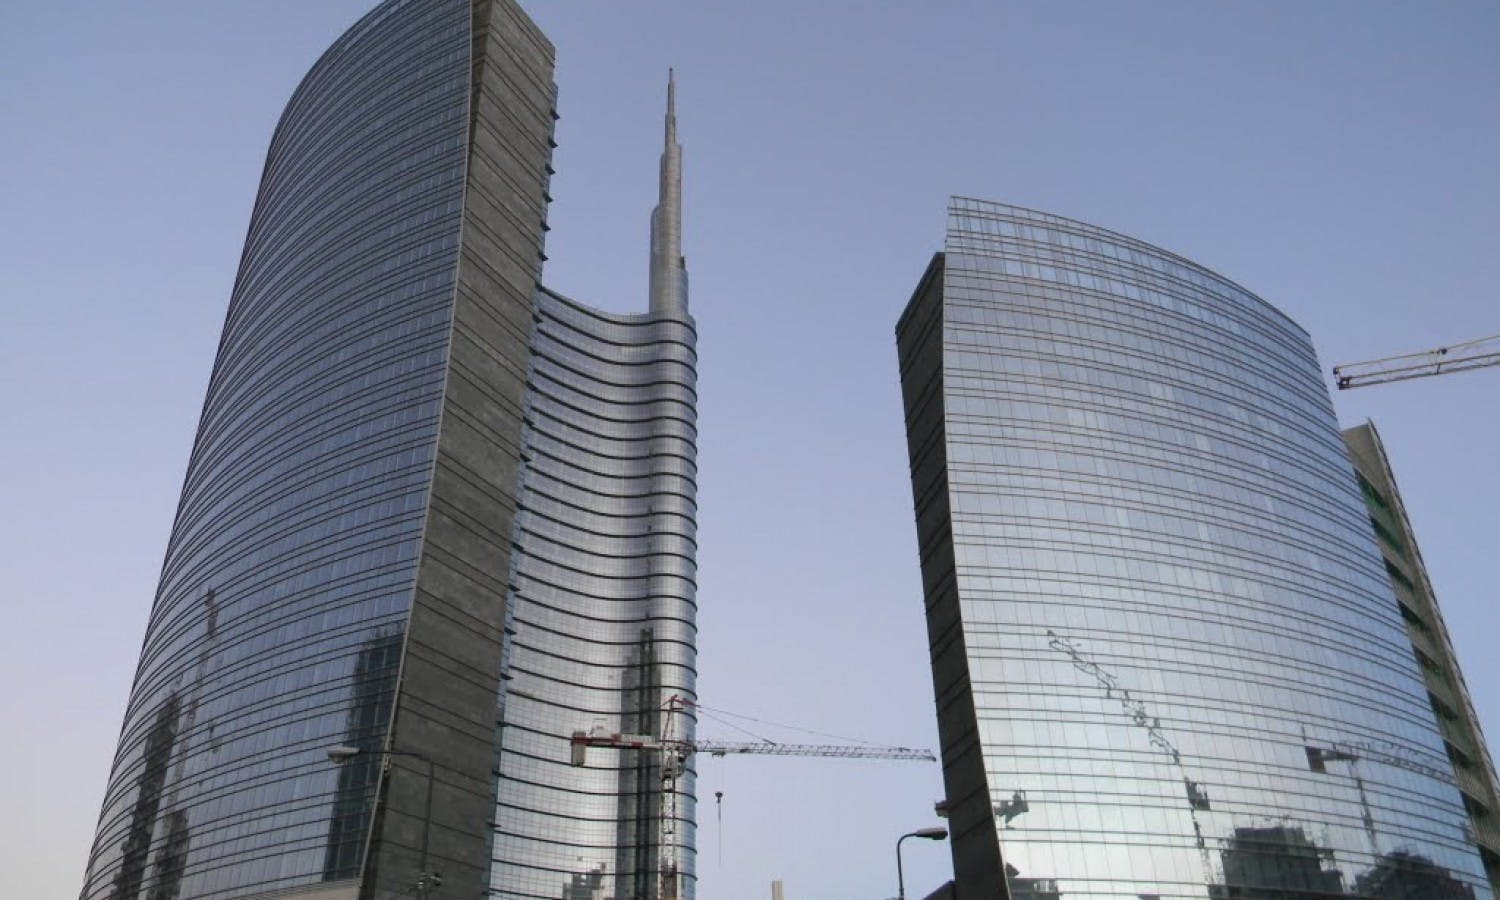 Tour of the New Architecture in Milan: Skyscrapers, Urban Developments and Design